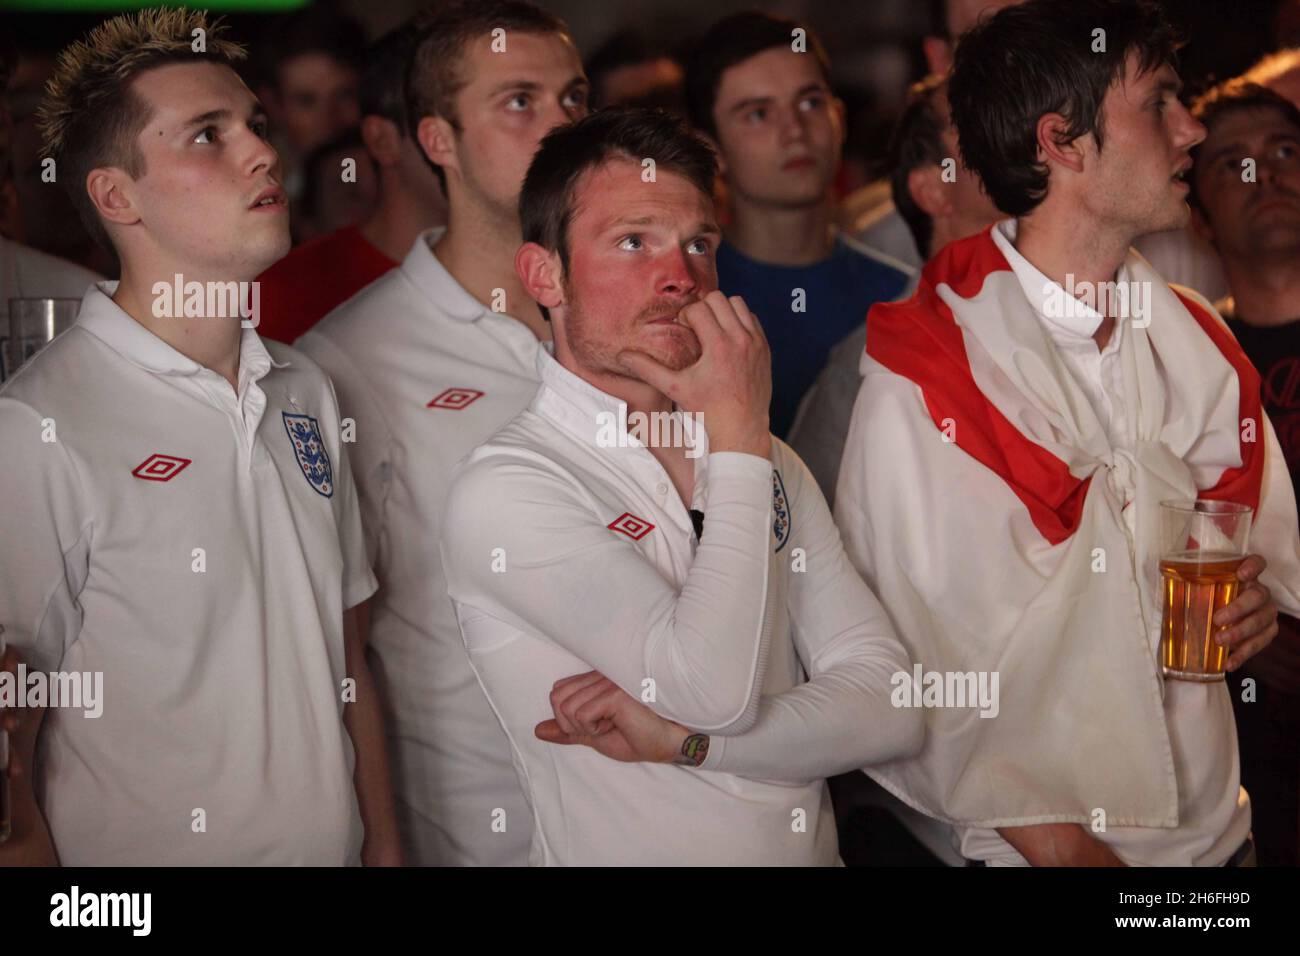 England football fans watch the gamel at The Sports Cafe in London's Haymarket this afternoon Stock Photo